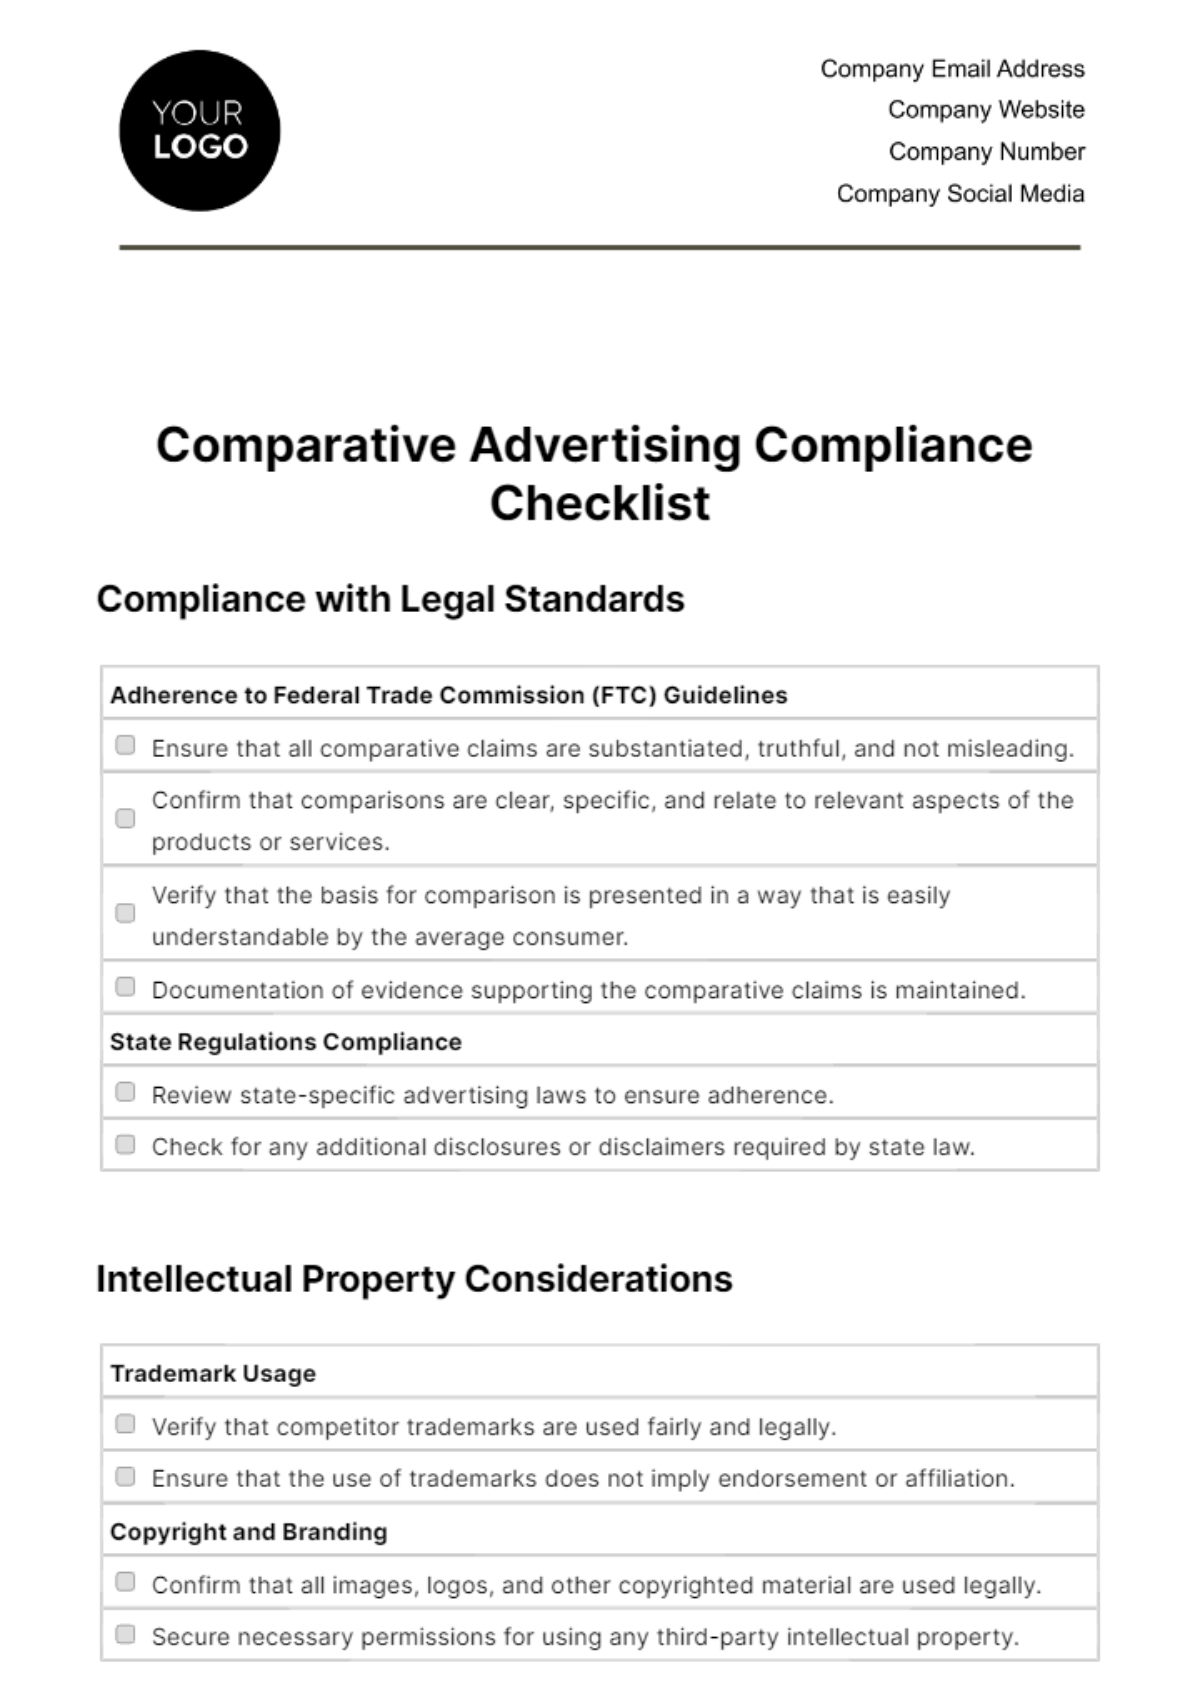 Comparative Advertising Compliance Checklist Template